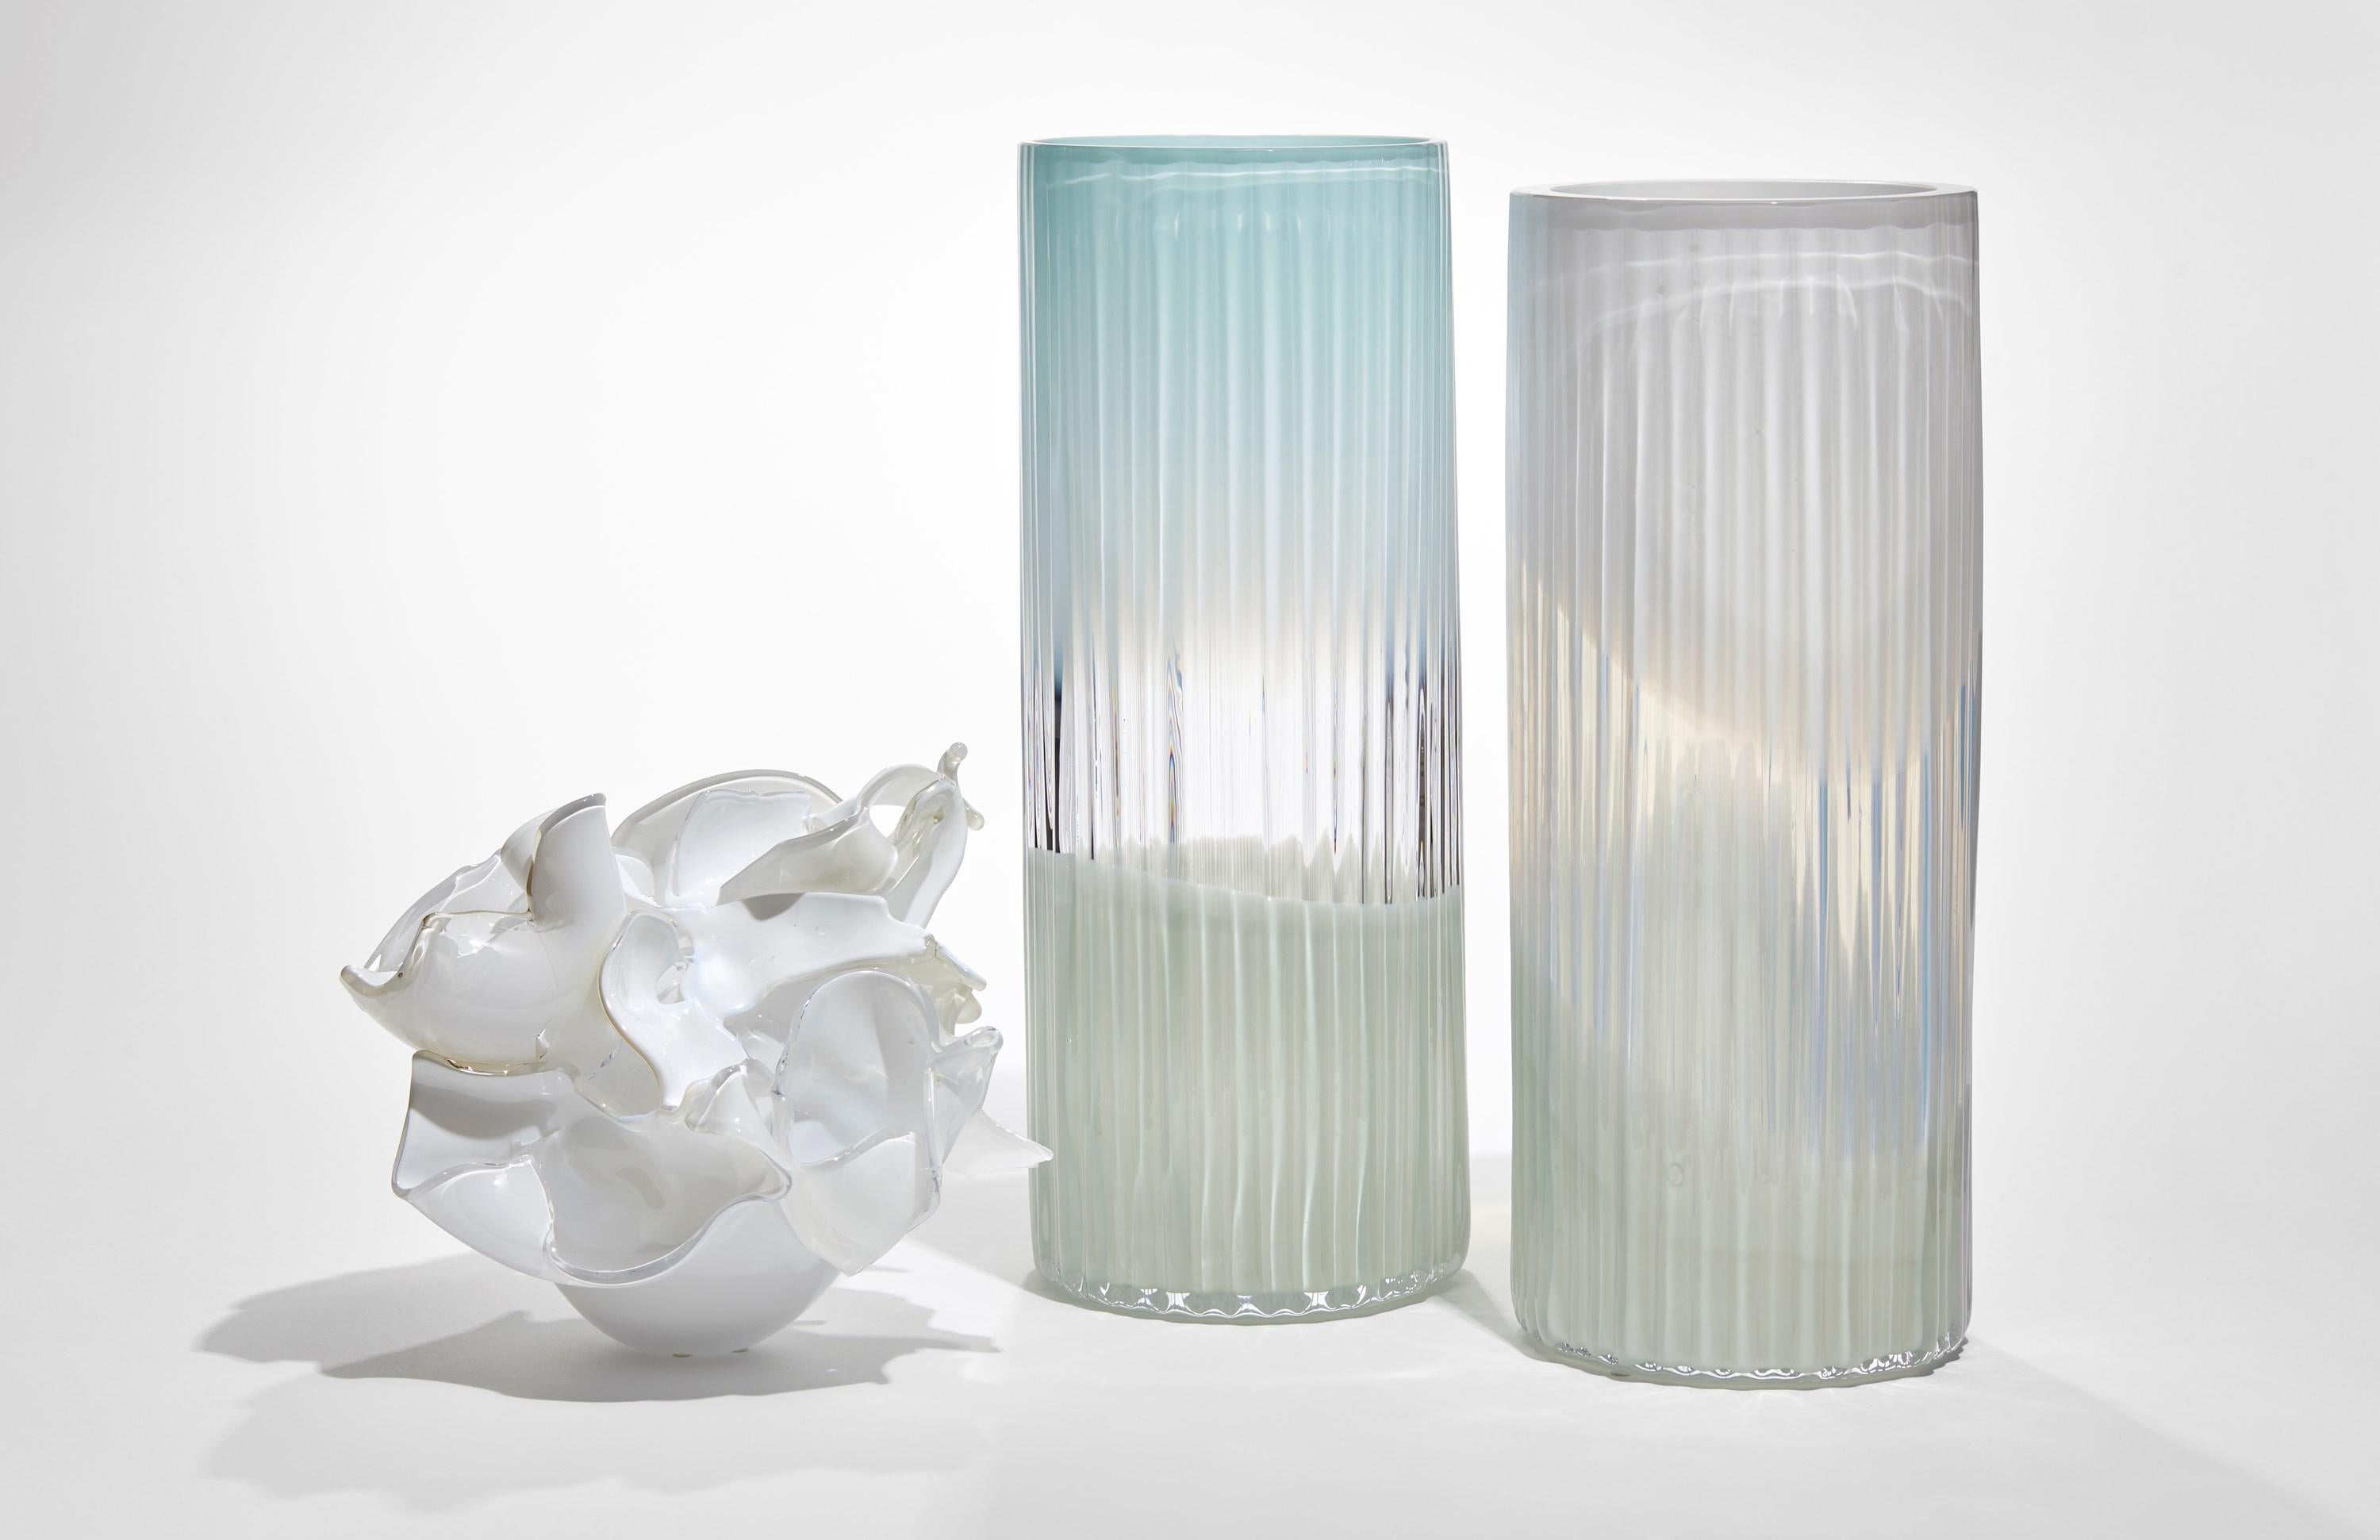 Hand-Crafted Plissé vase in Turquoise & Celadon, a glass vase by Lena Bergström For Sale